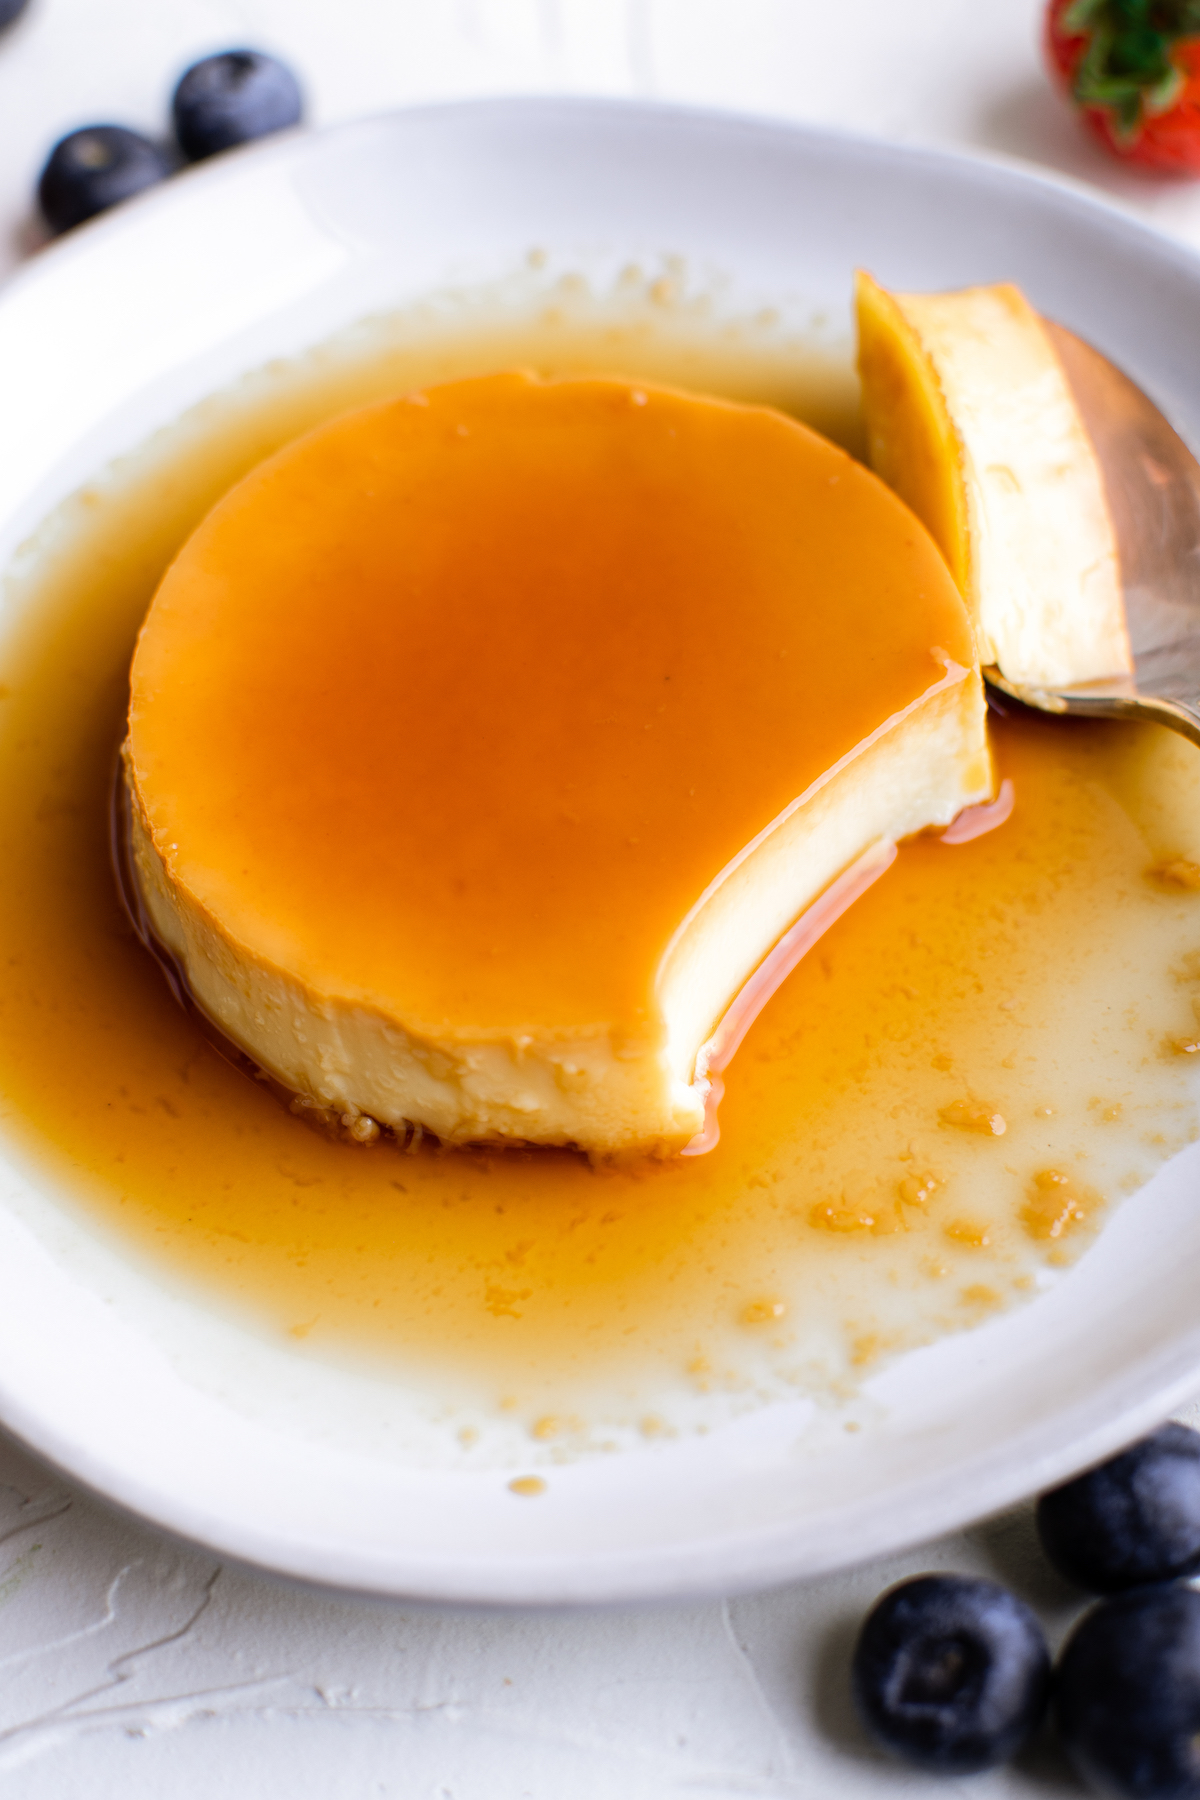 A serving of crème caramel with the sauce pooling on the plate. A bite-sized portion has been cut from the serving, and sits nearby resting on a spoon.